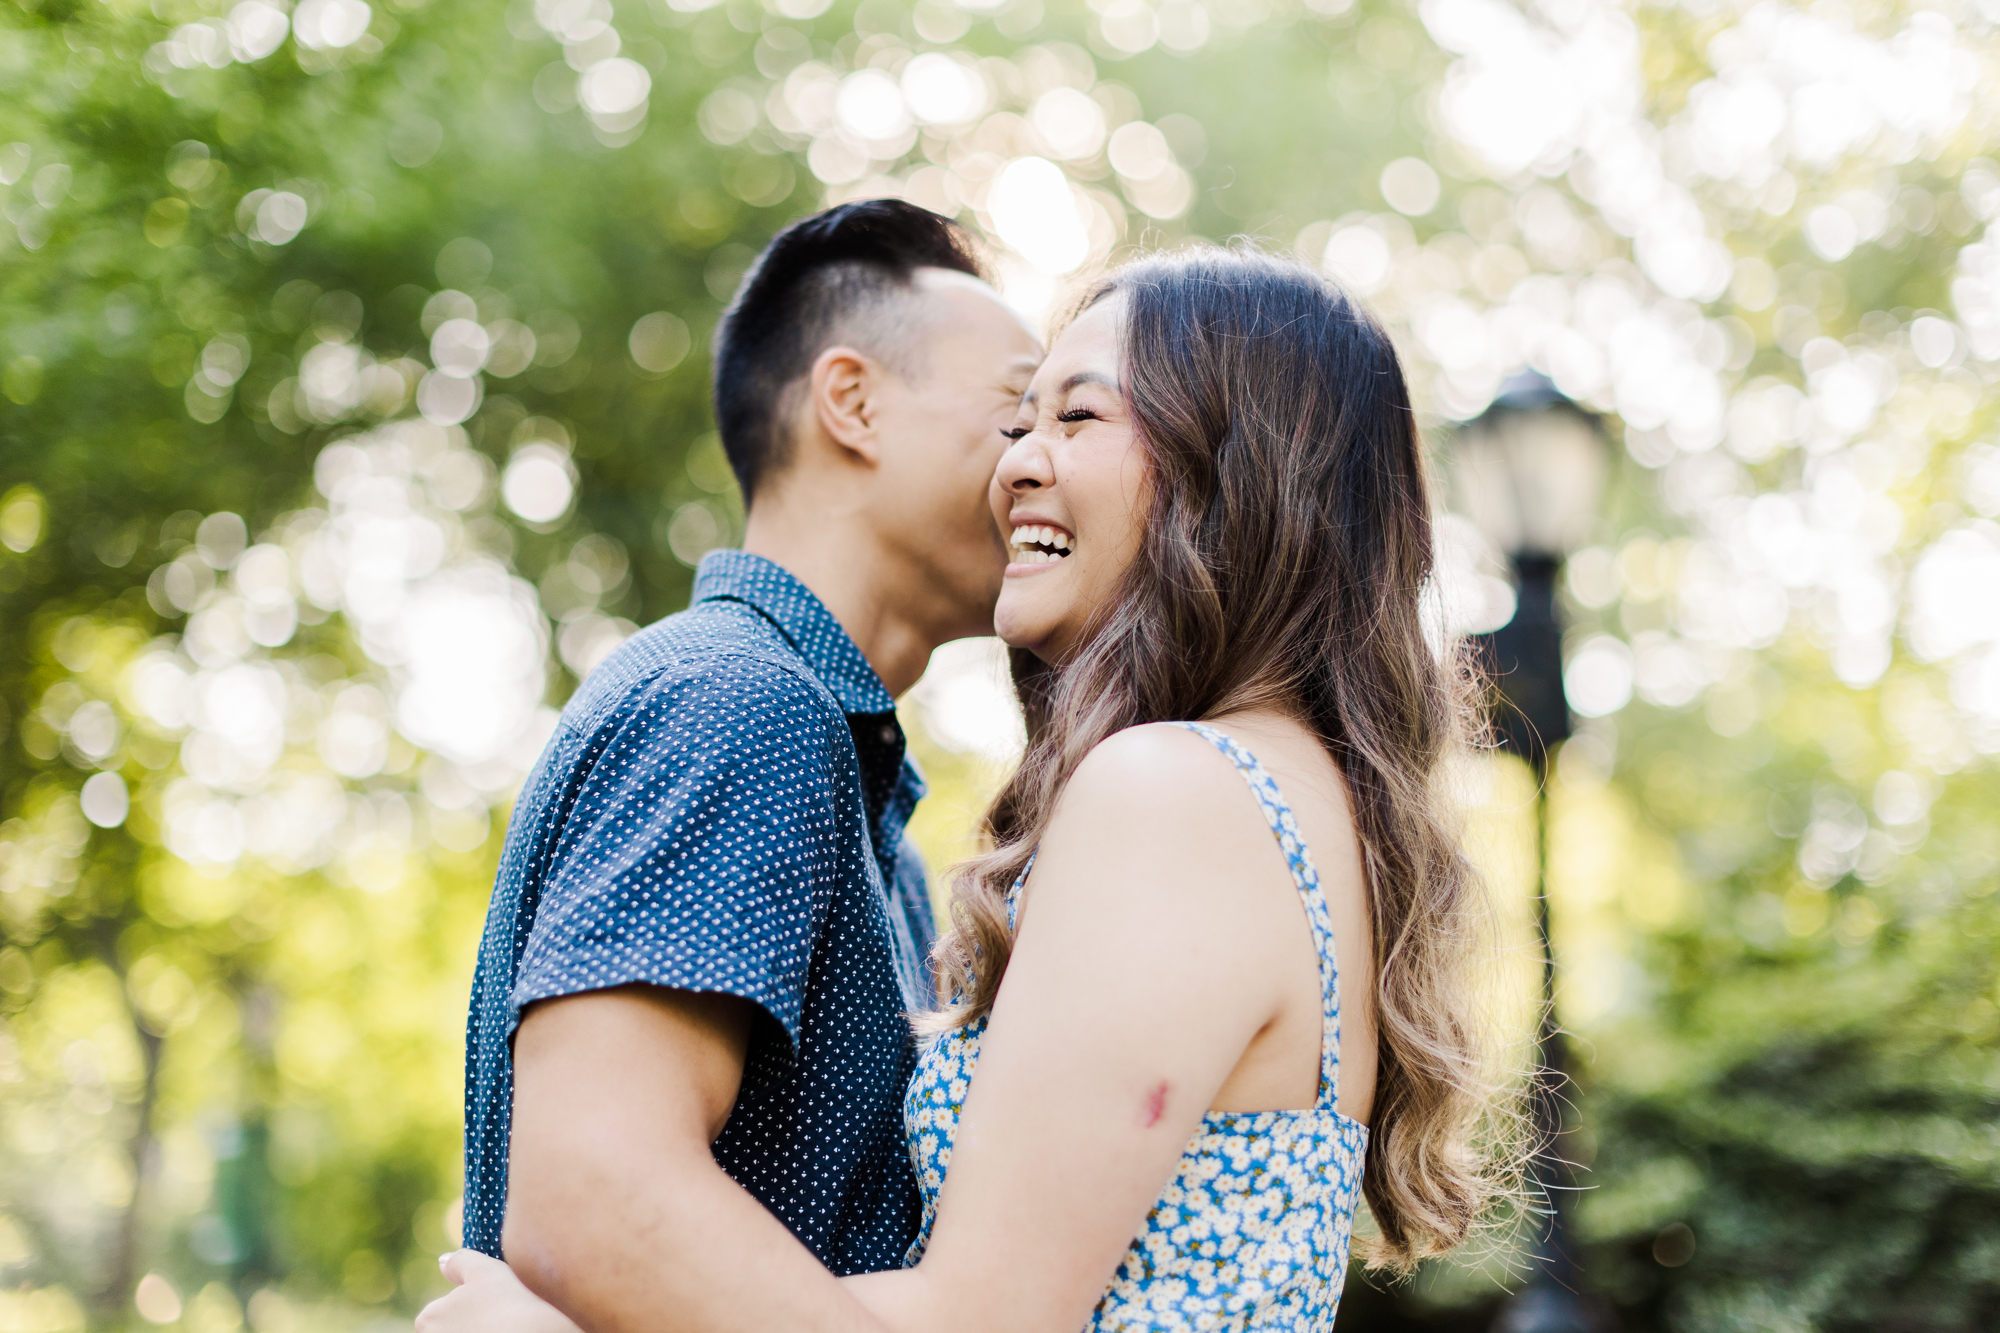 Iconic Engagement Photos in Central Park, New York